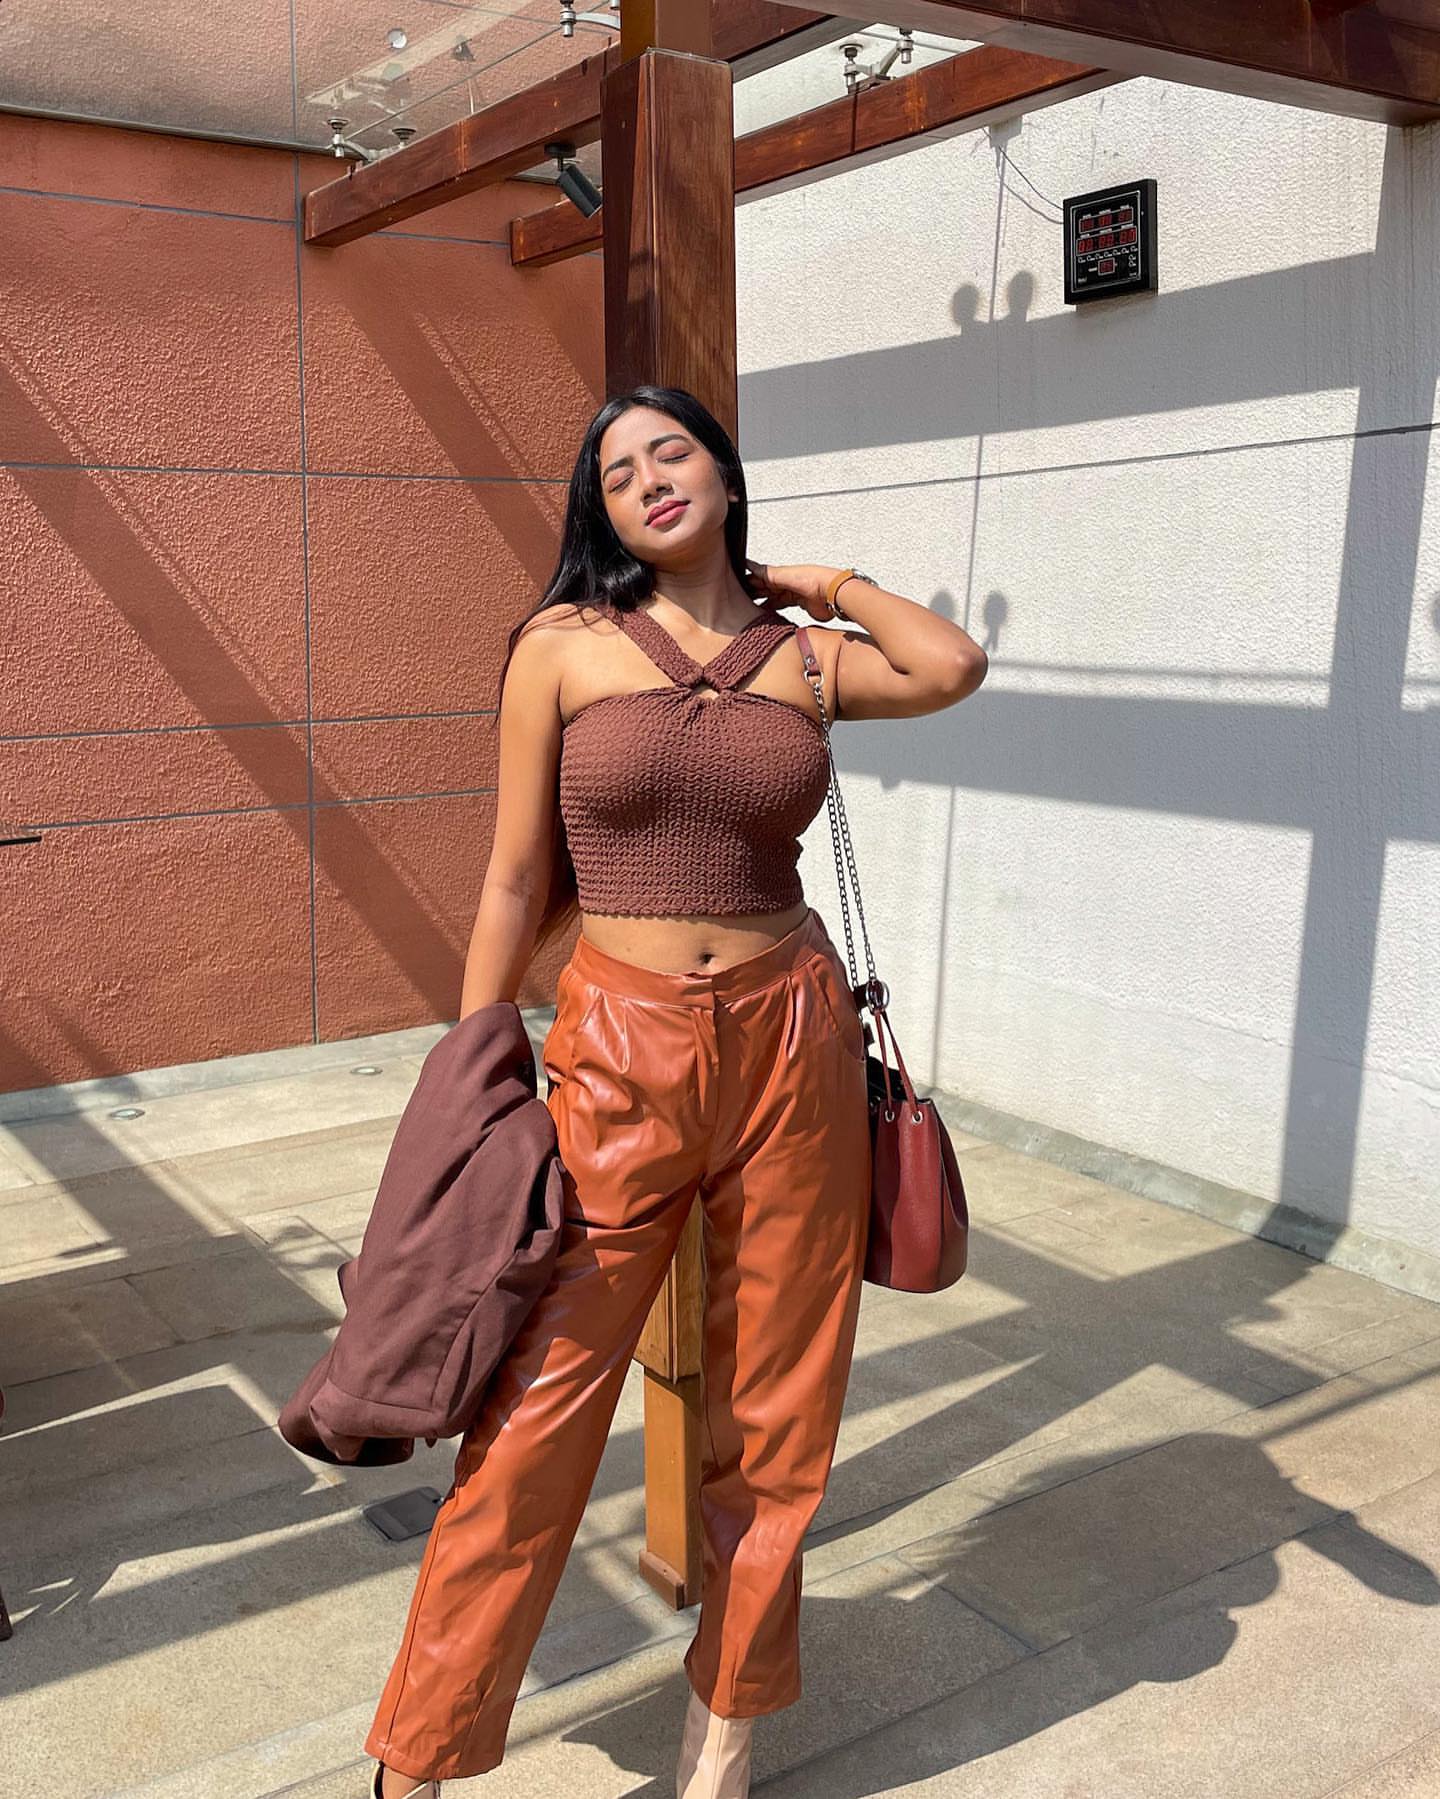 15 Elevated Brown Pants Outfit Ideas To Make You Love This Hue